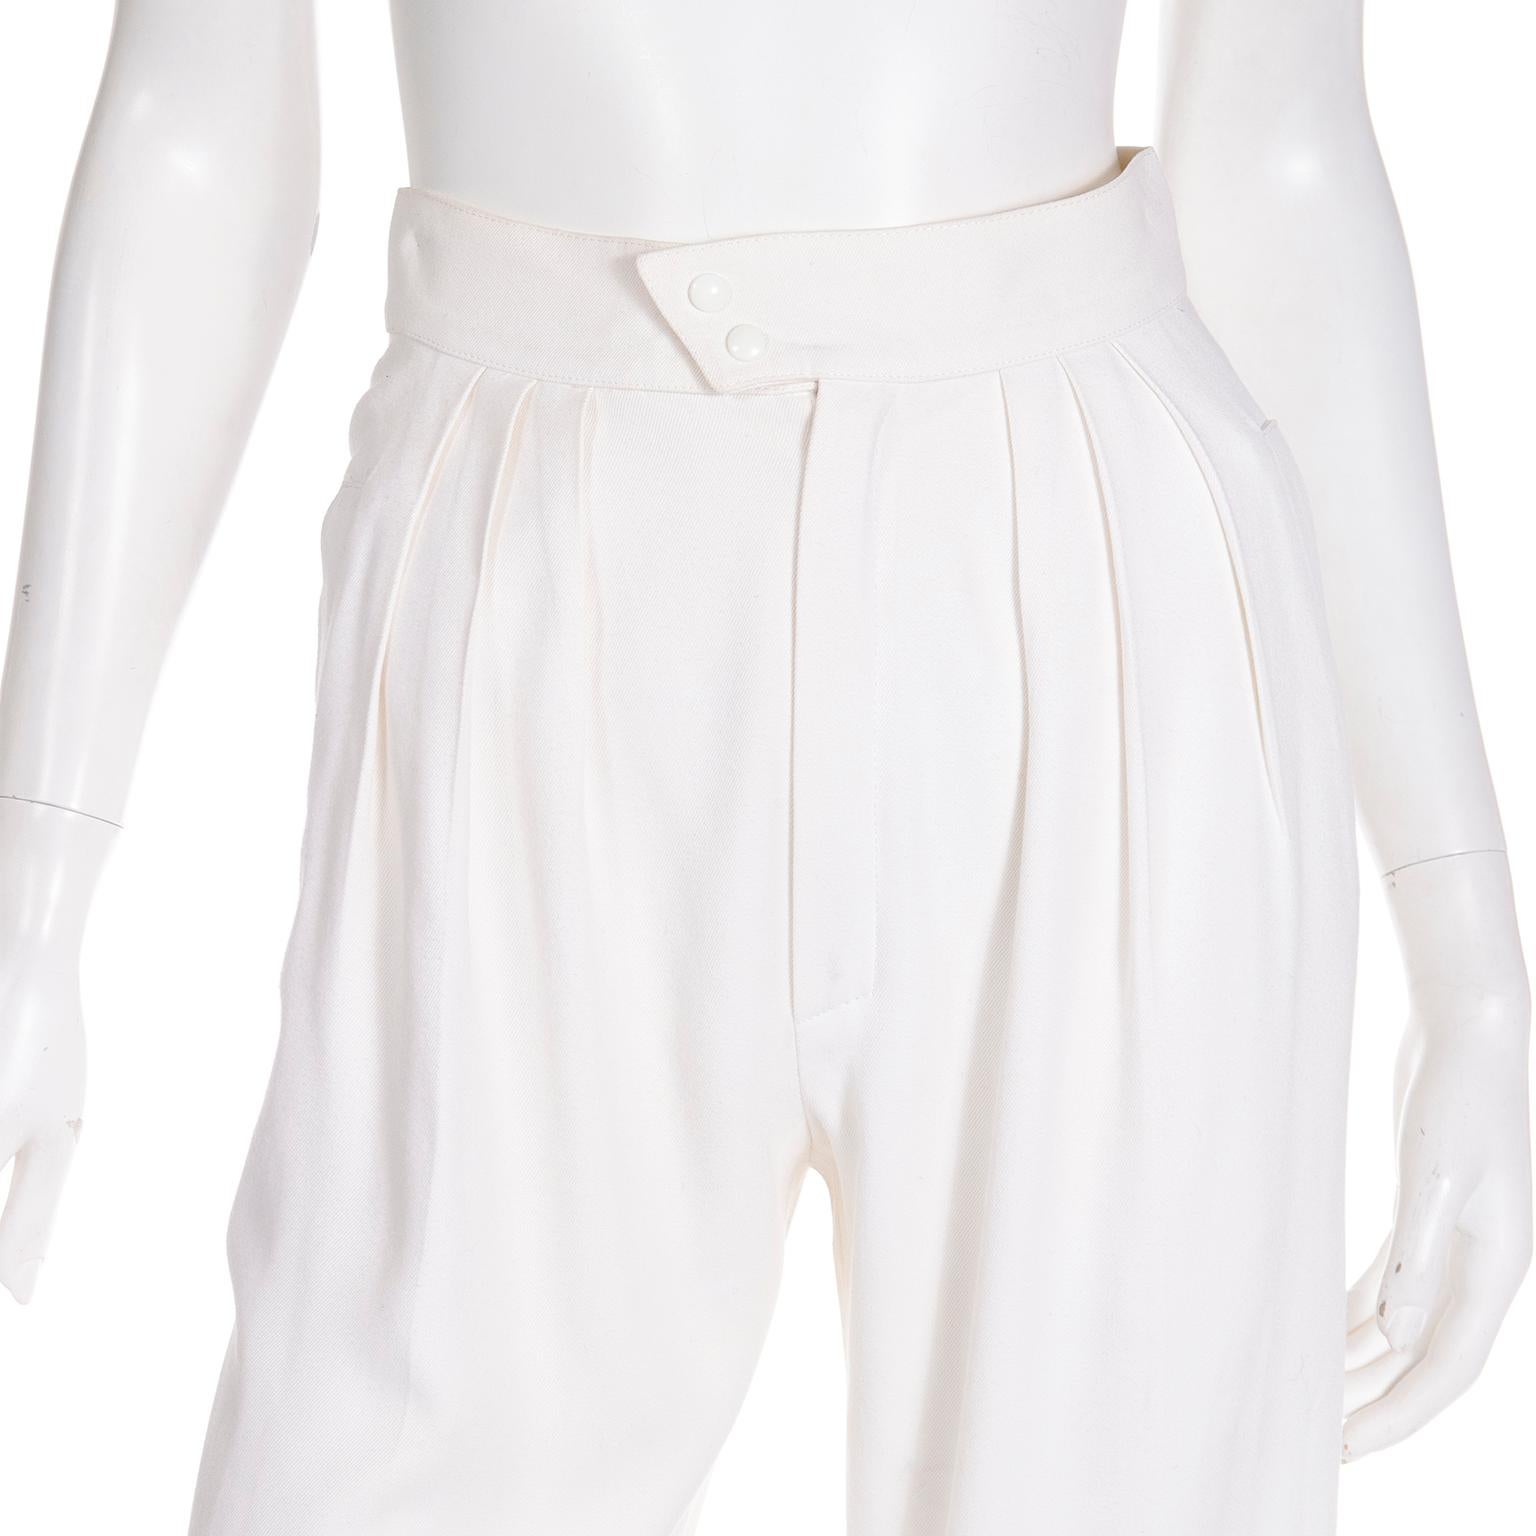 Thierry Mugler Vintage White 2 Pc Suit Jacket & Trousers Outfit  For Sale 7